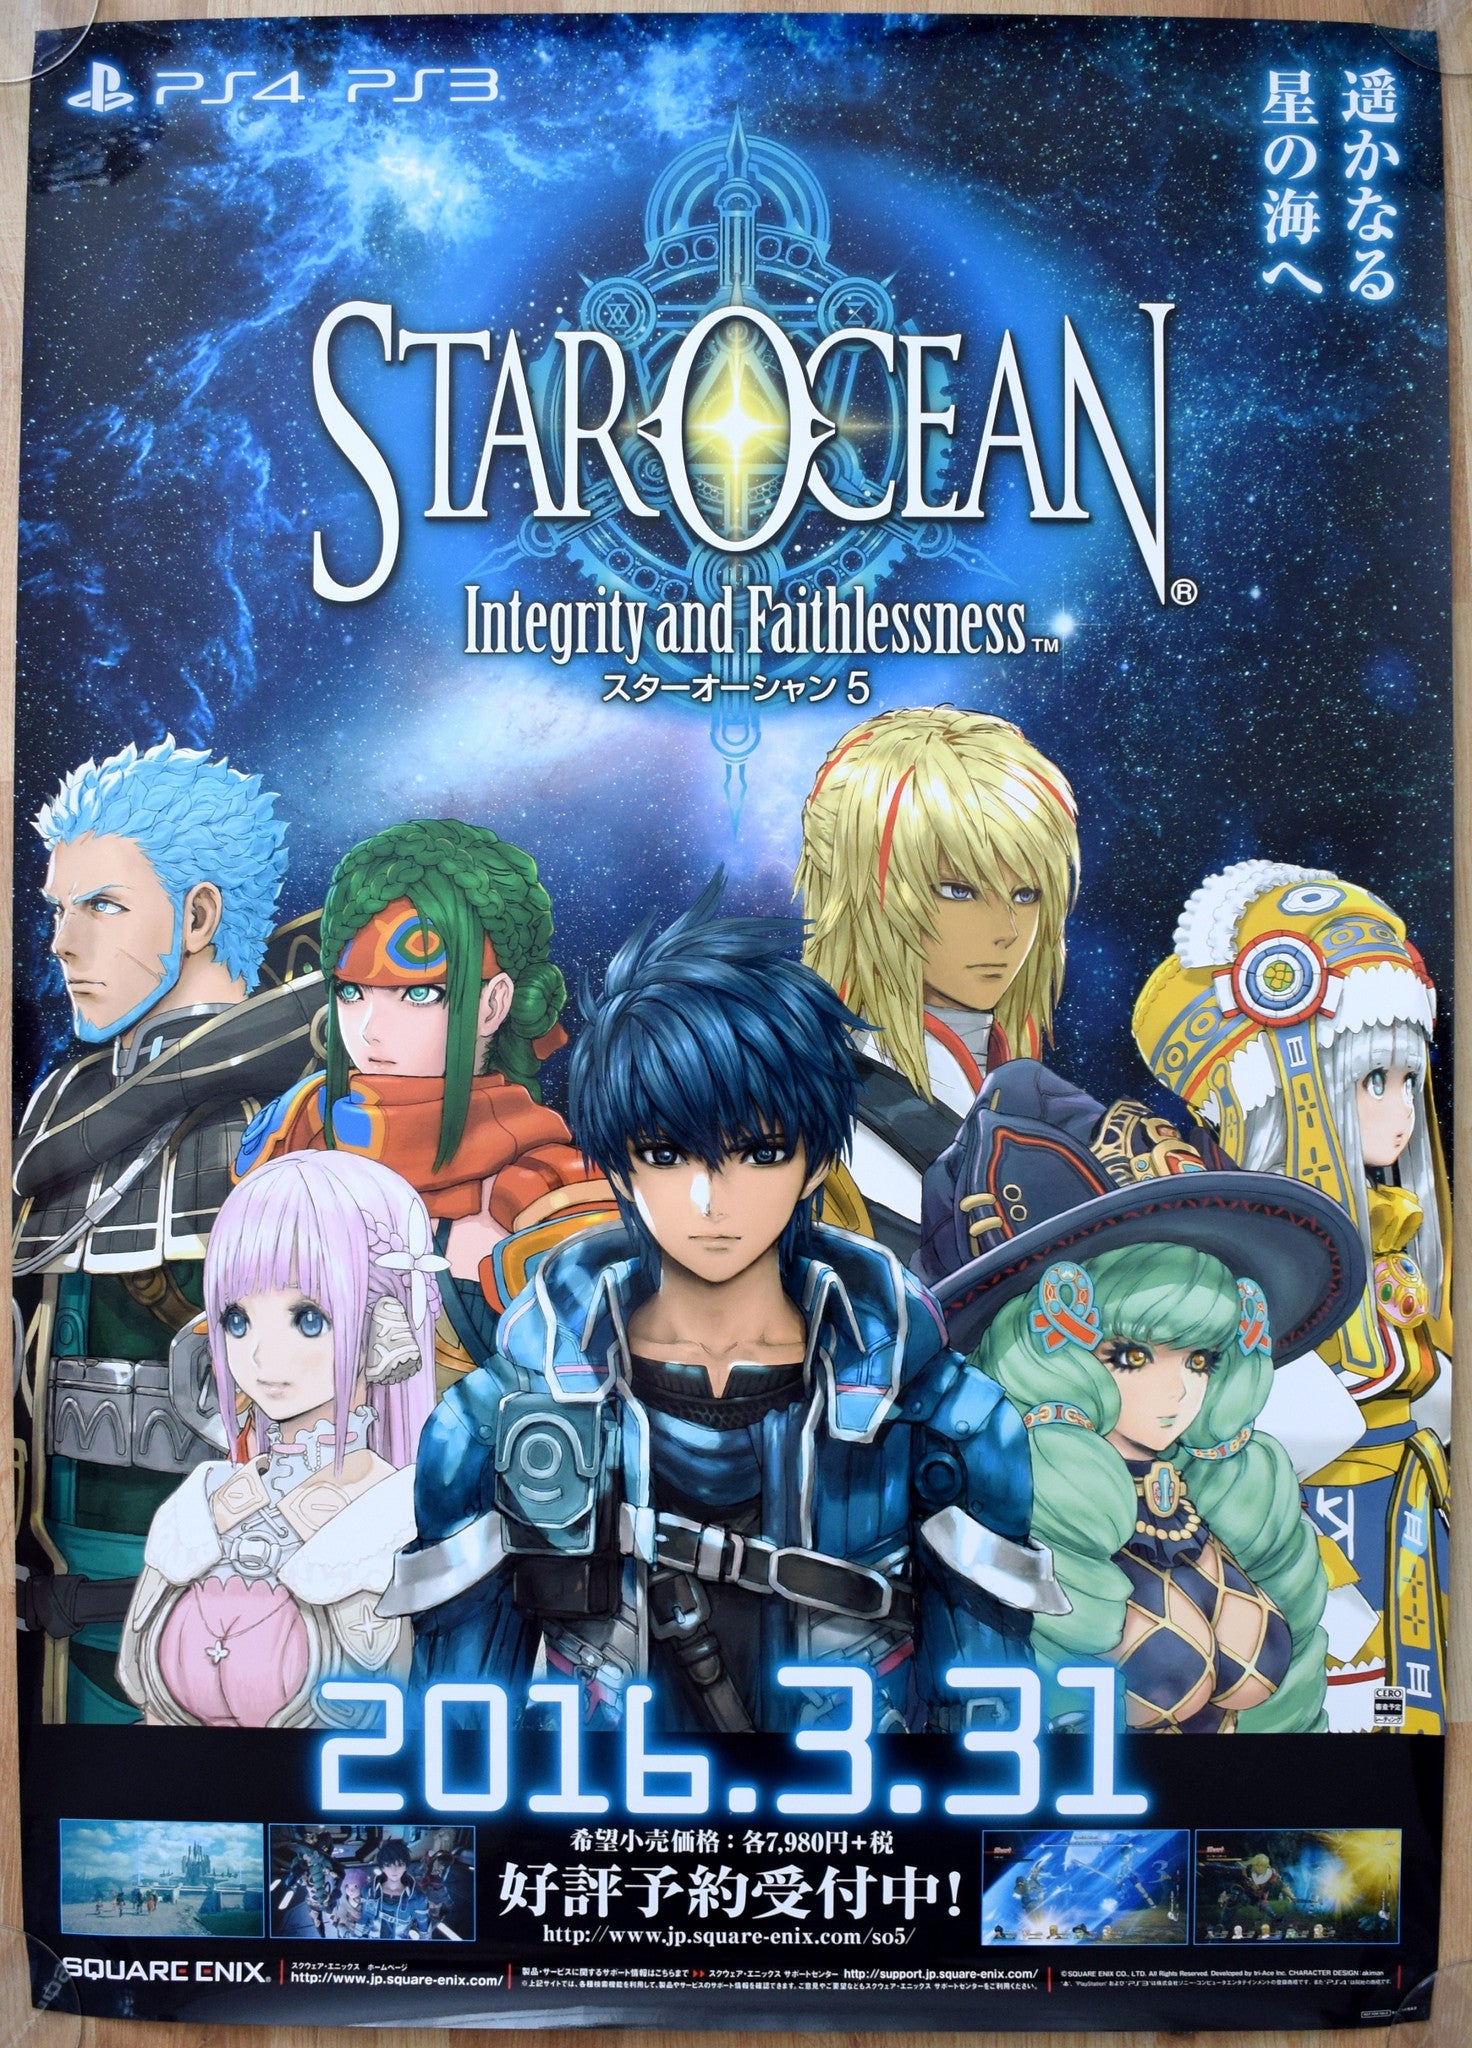 Star Ocean: Integrity and Faithlessness (B2) Japanese Promotional Poster #3